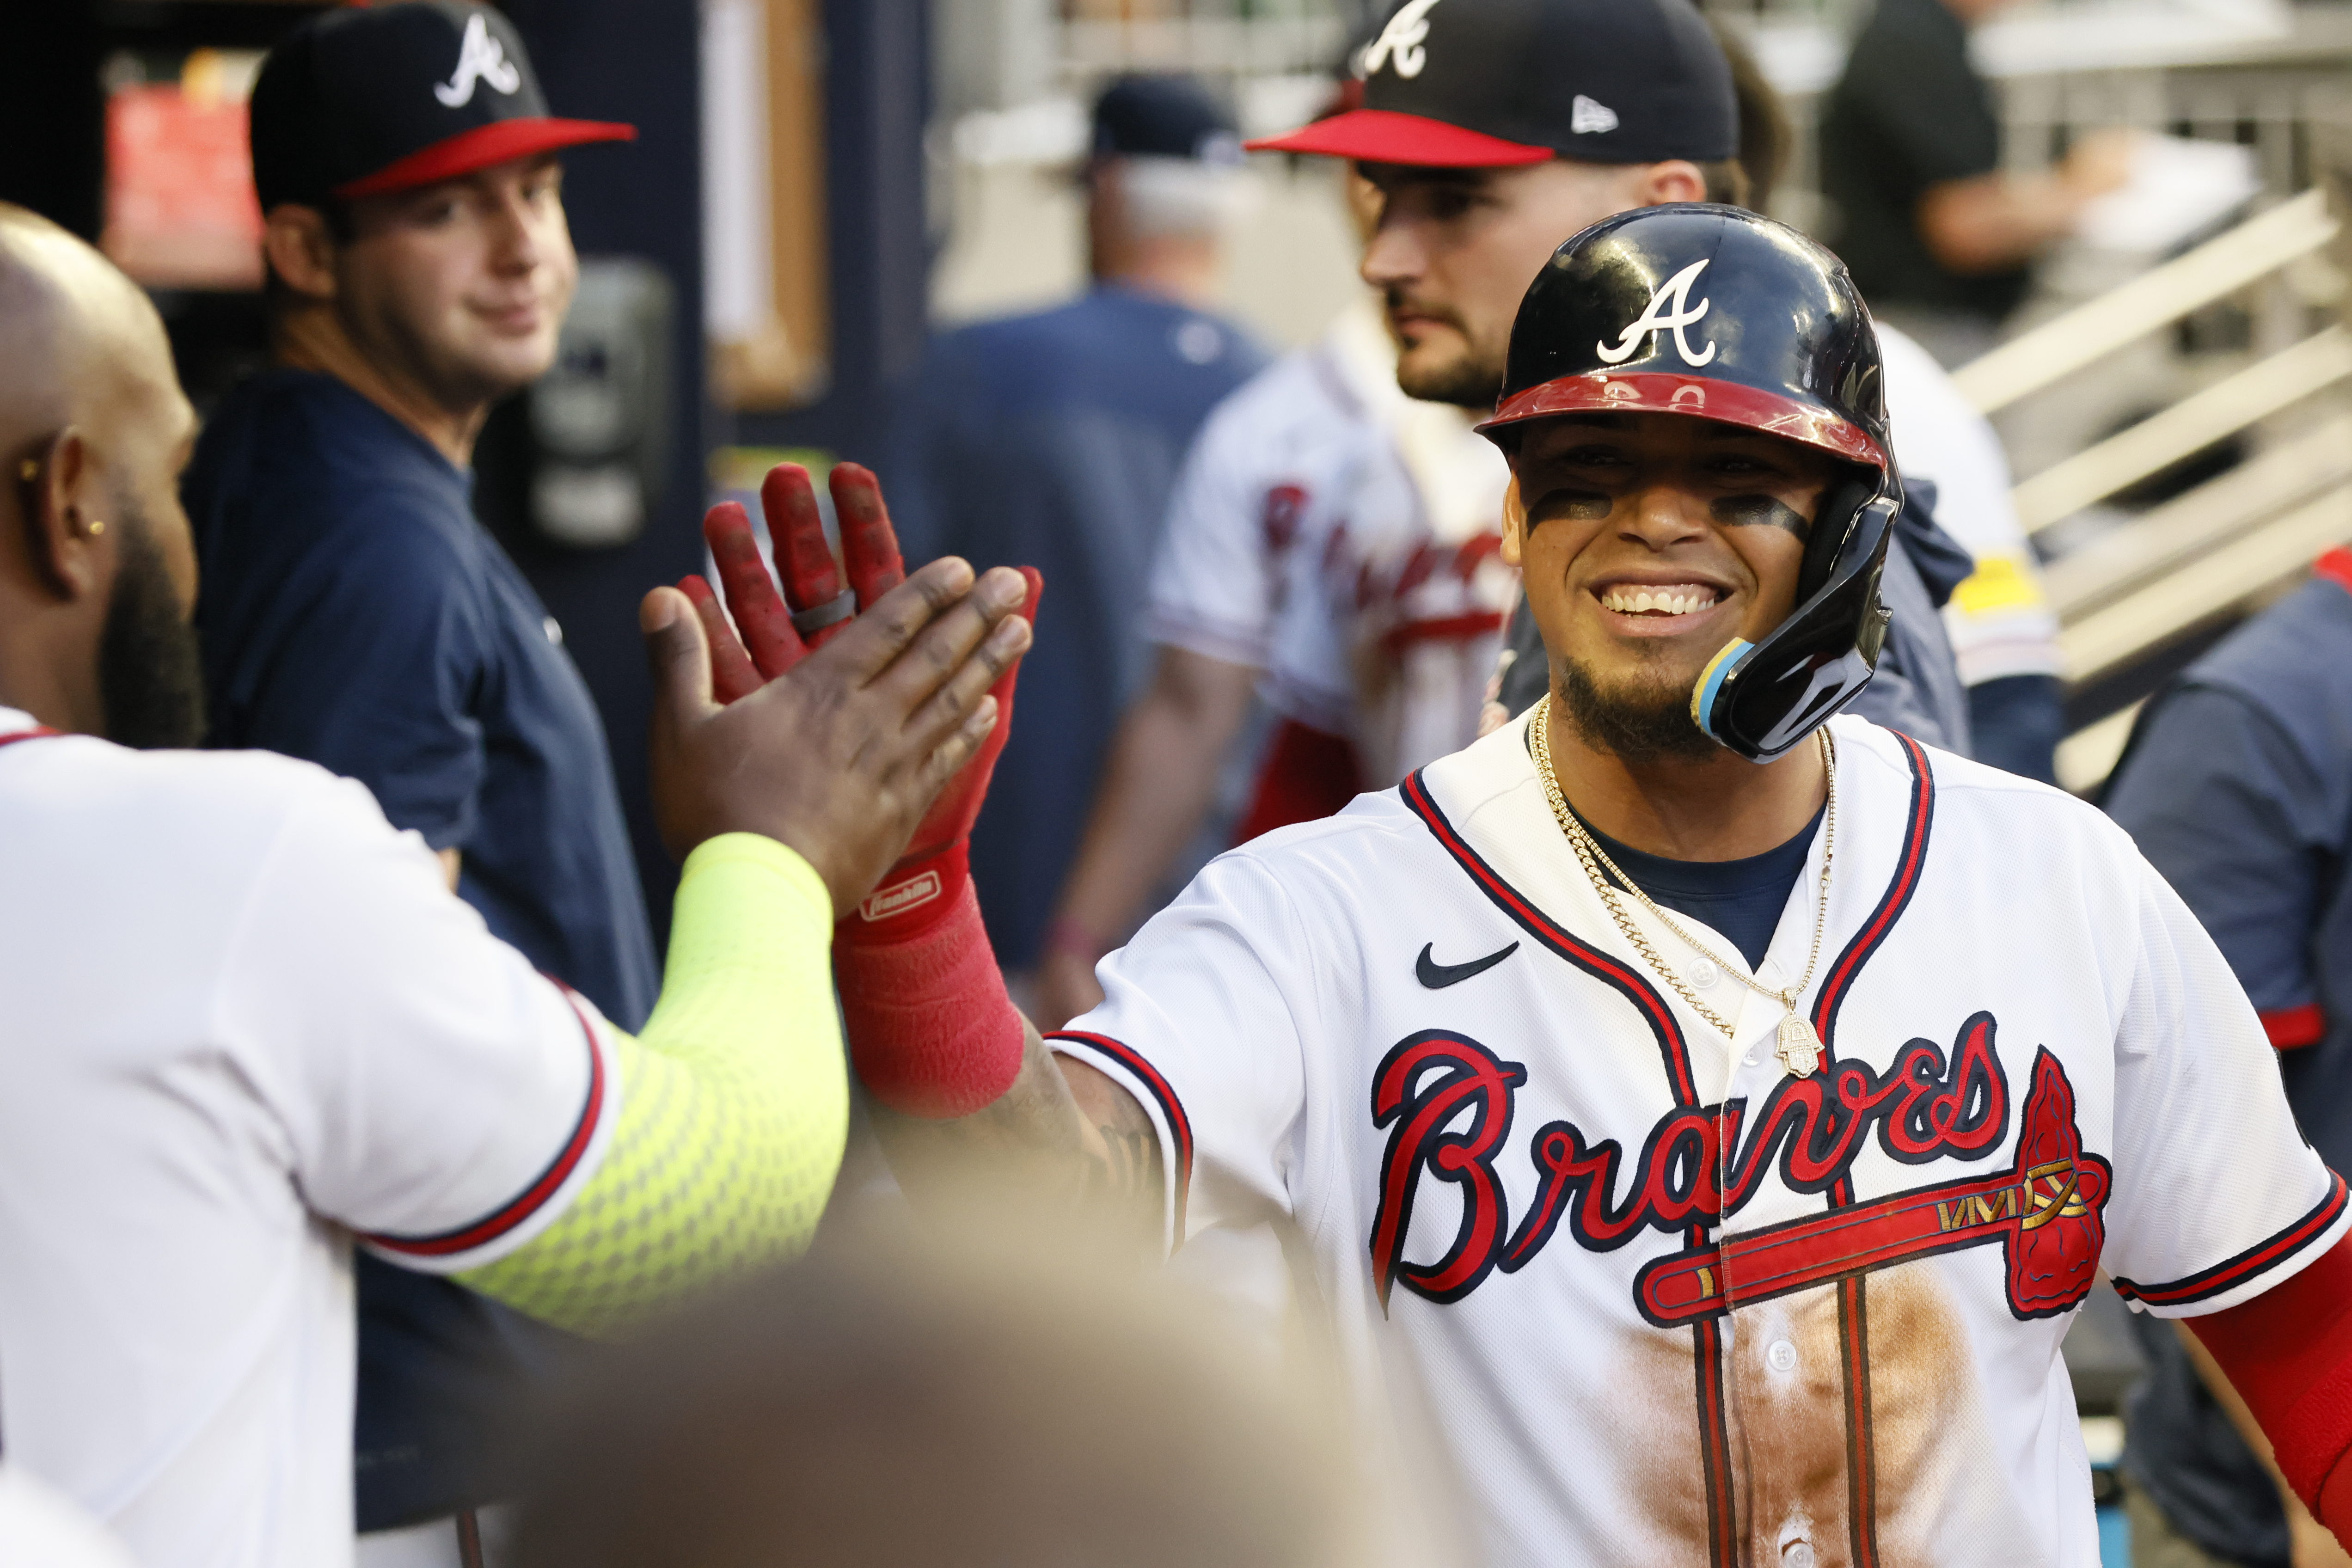 Ozzie Albies, AJ Smith-Shawver lead the Braves to an 8-3 win over